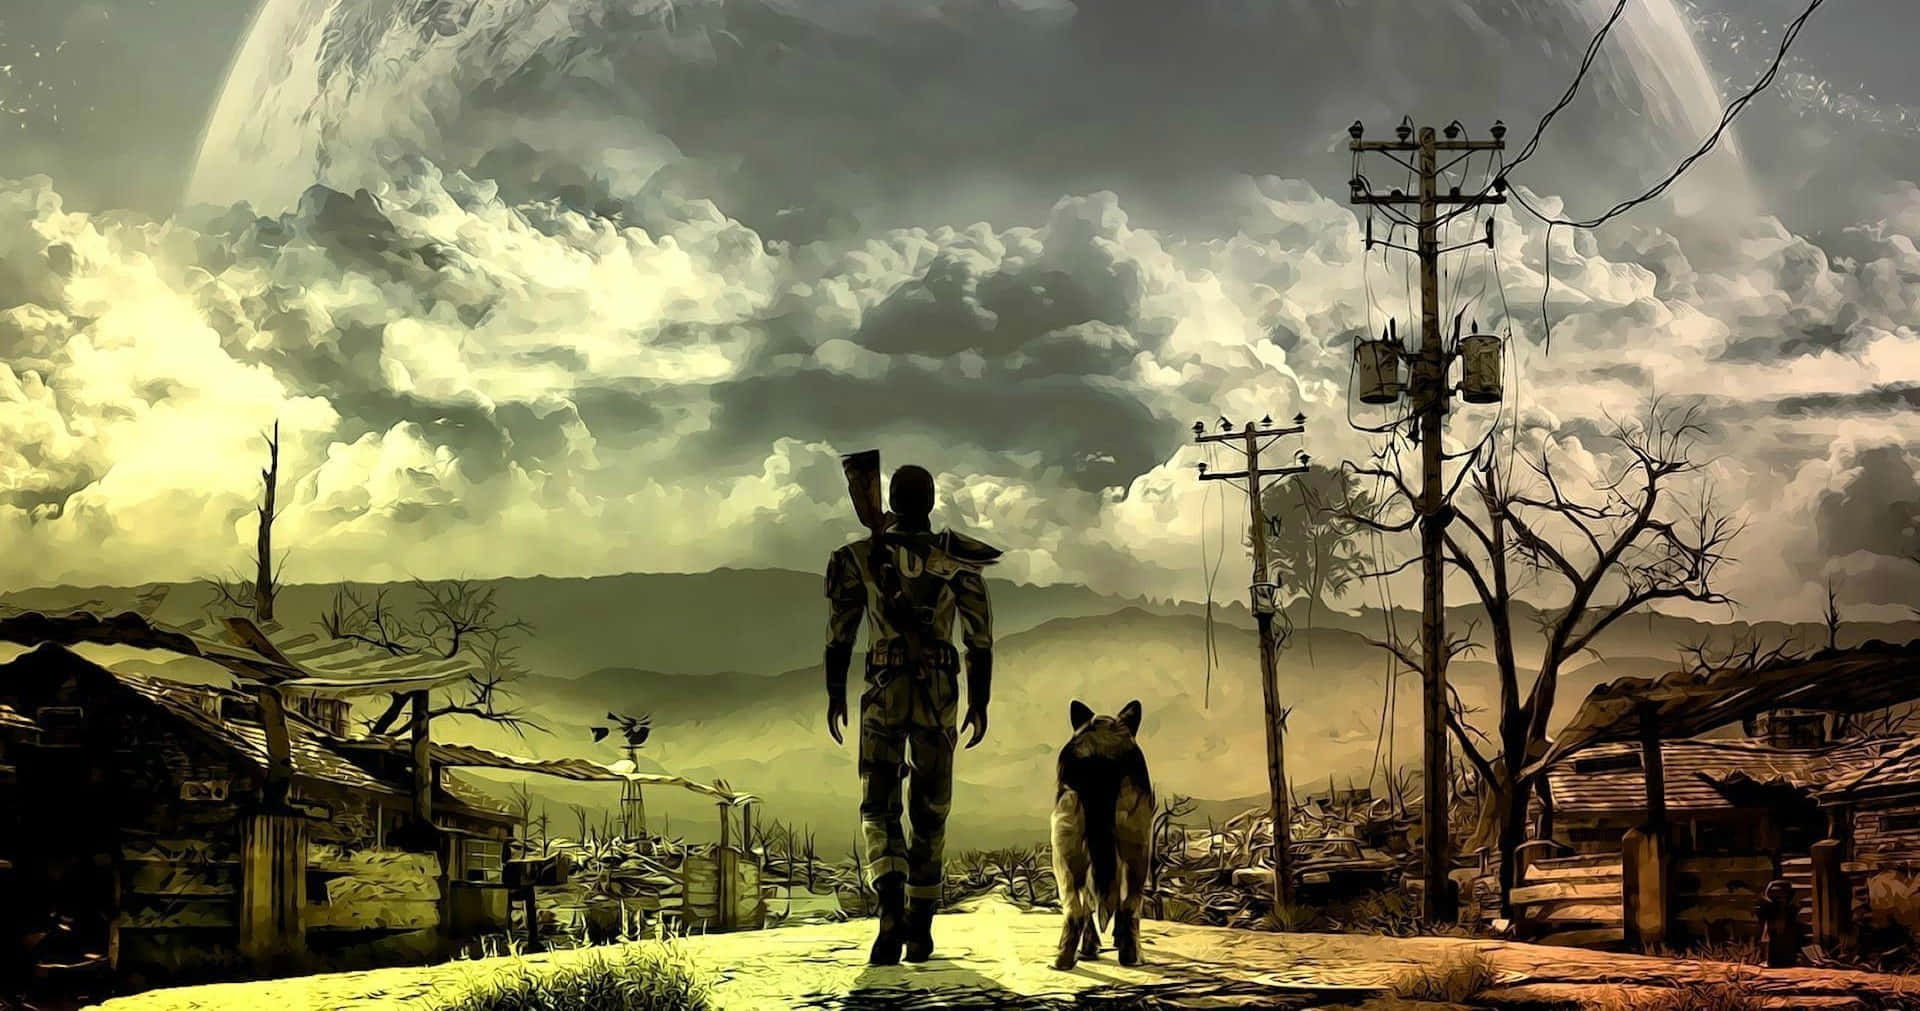 Rebuild and Conquer the Commonwealth in Fallout 4 Wallpaper